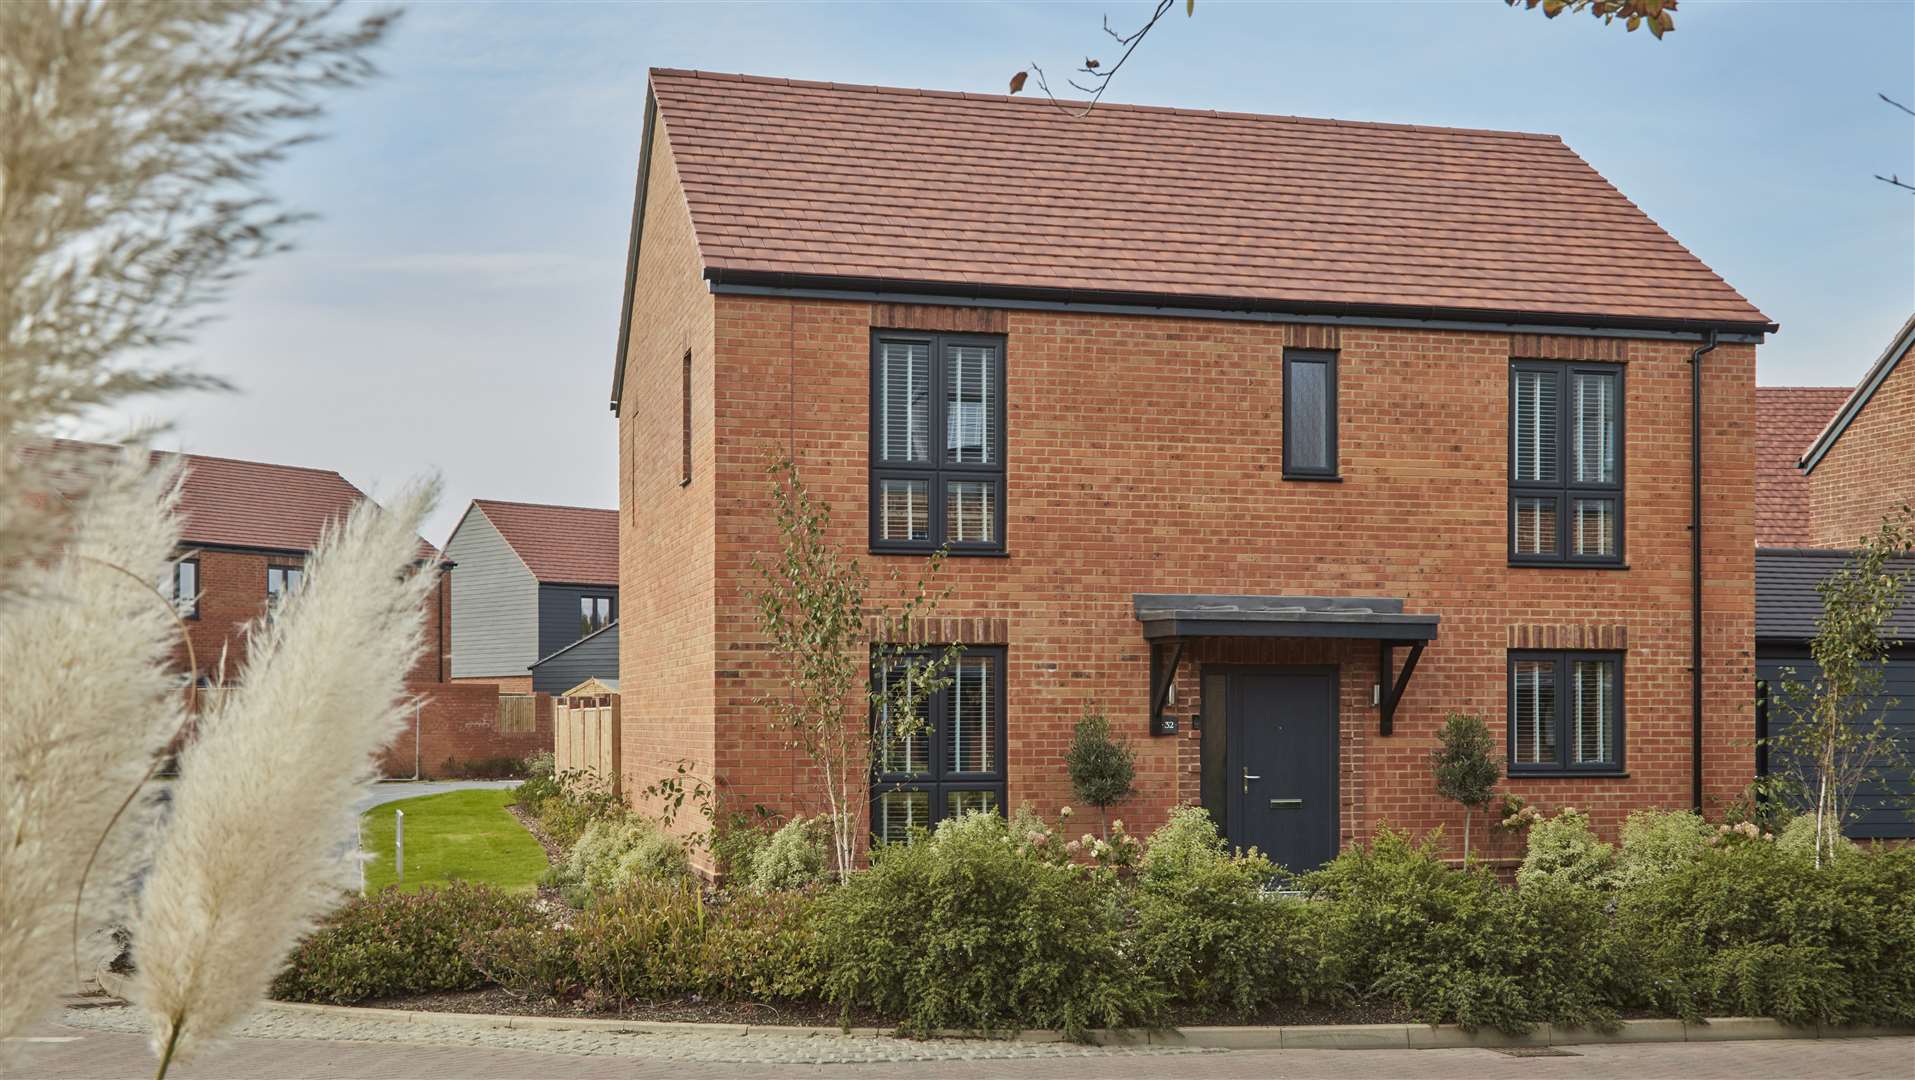 A street scene at Bellway’s Blenheim Green development in Kings Hill, where the housebuilder is offering buyers a £25,000 cashback incentive on selected homes purchased in January 2024.